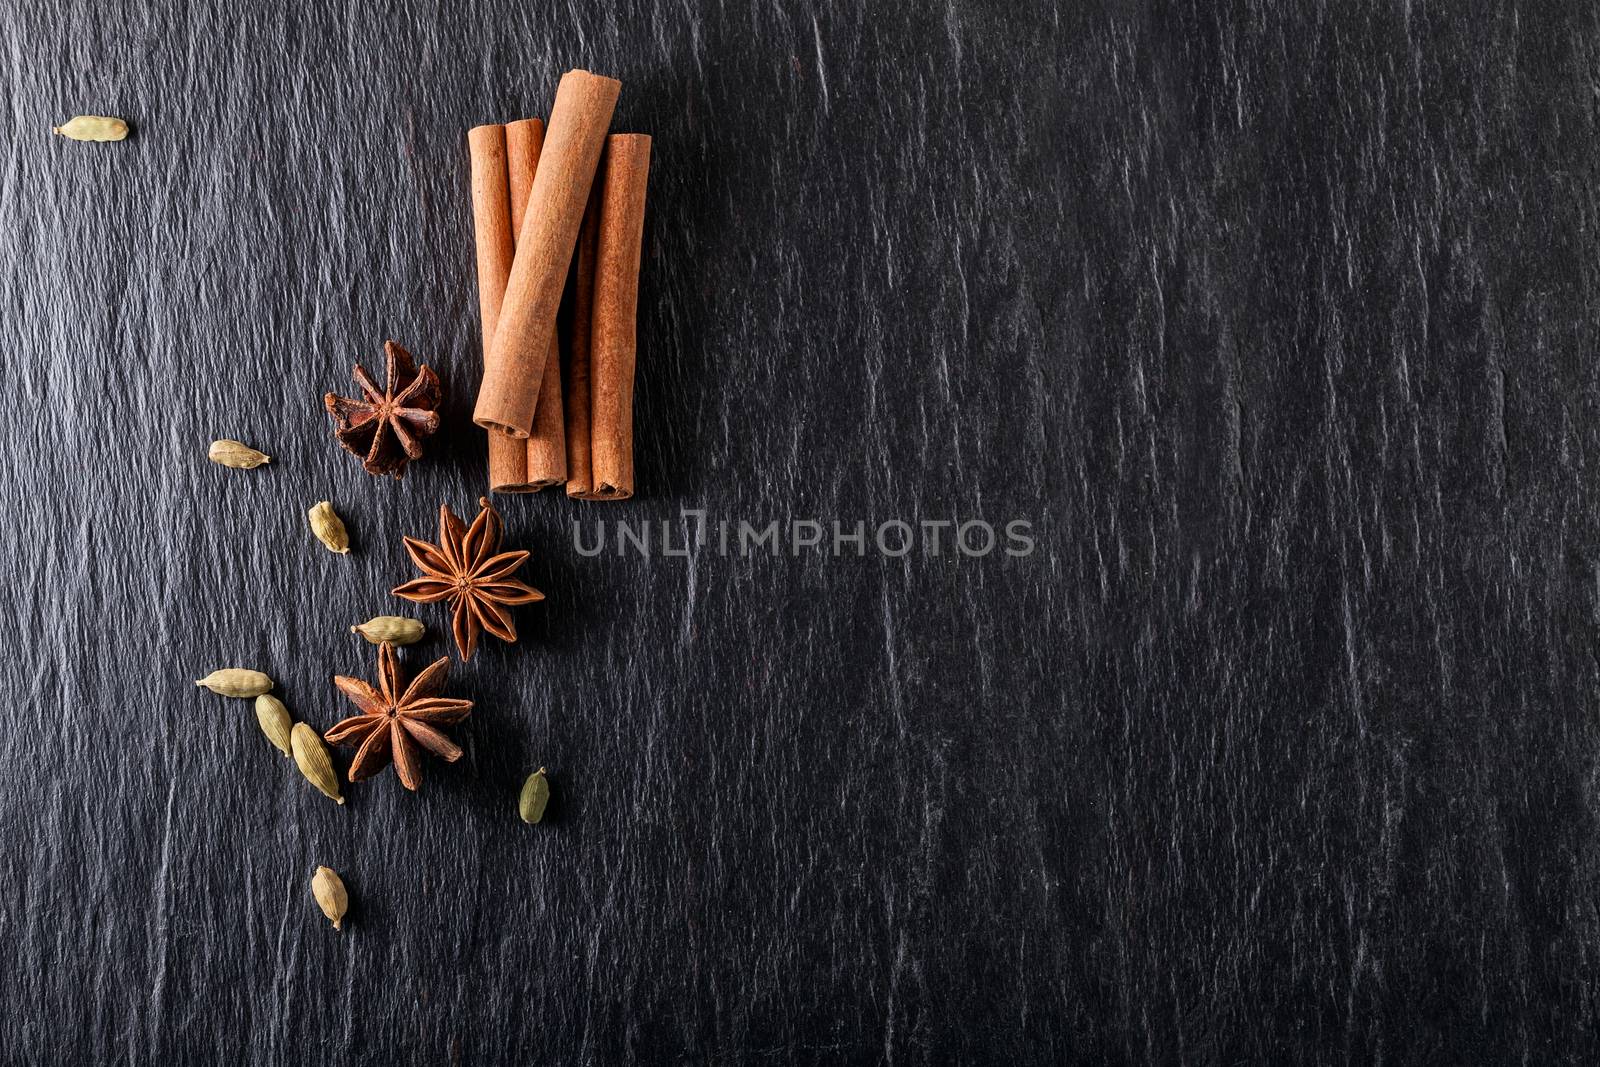 Winter spices, including cardamom, star anise and cinnamon